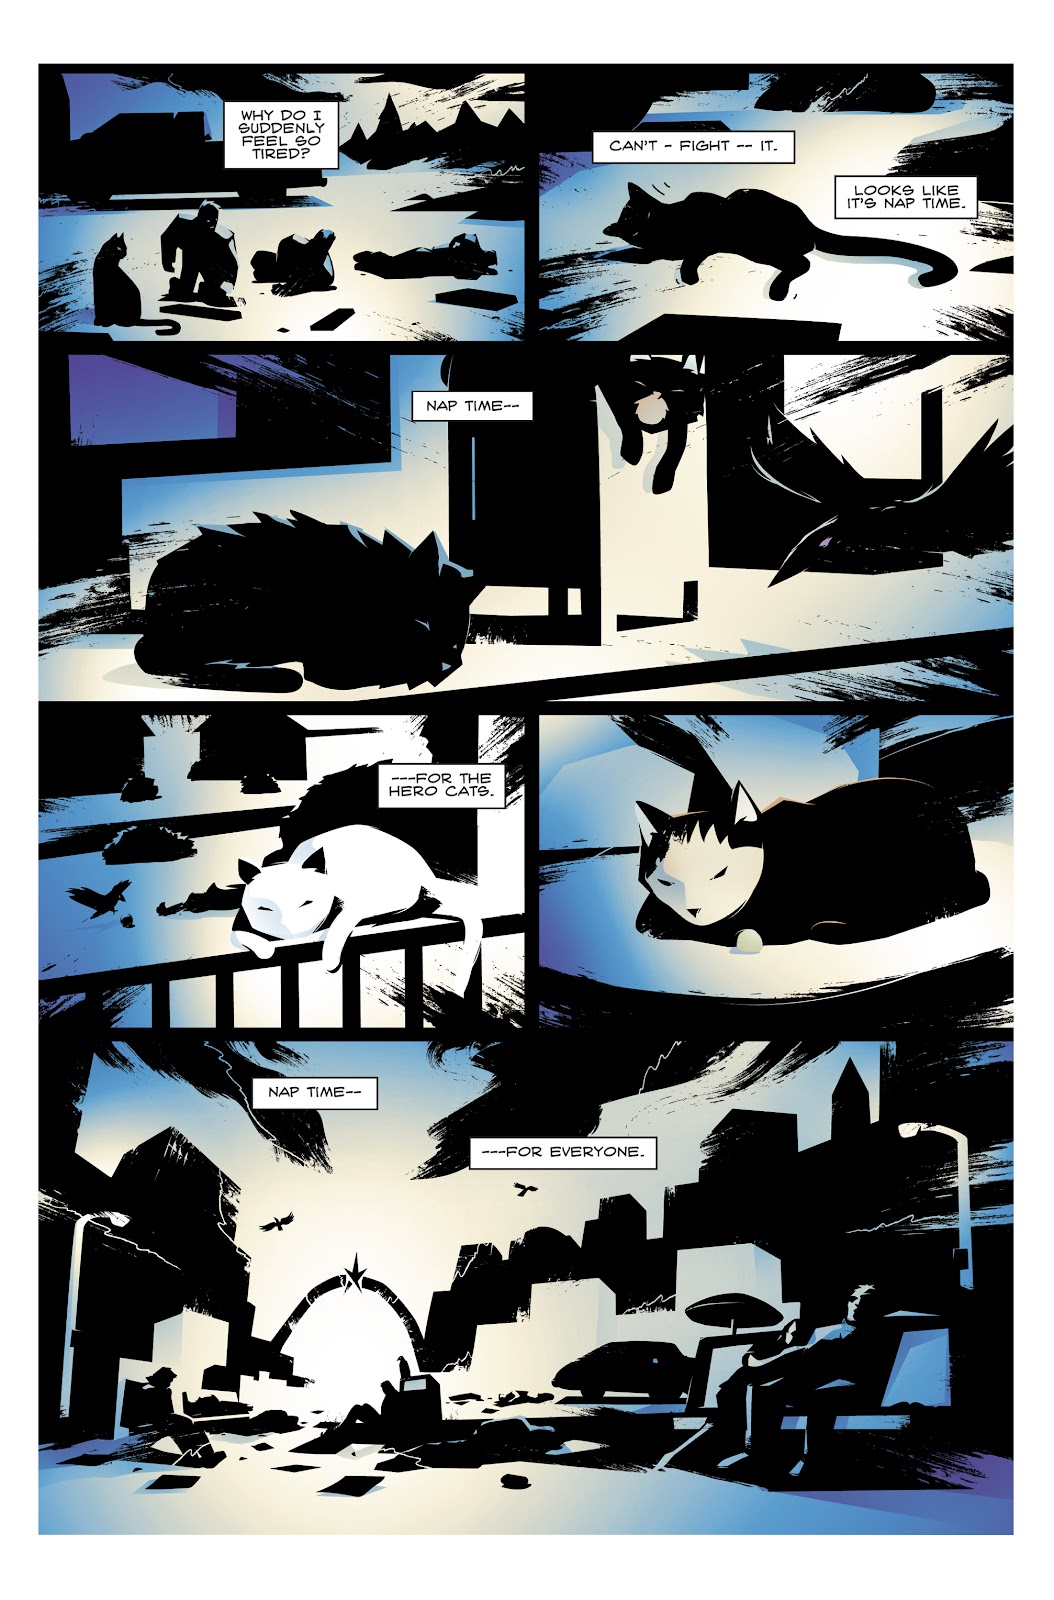 Hero Cats: Midnight Over Stellar City Vol. 2 issue 1 - Page 23